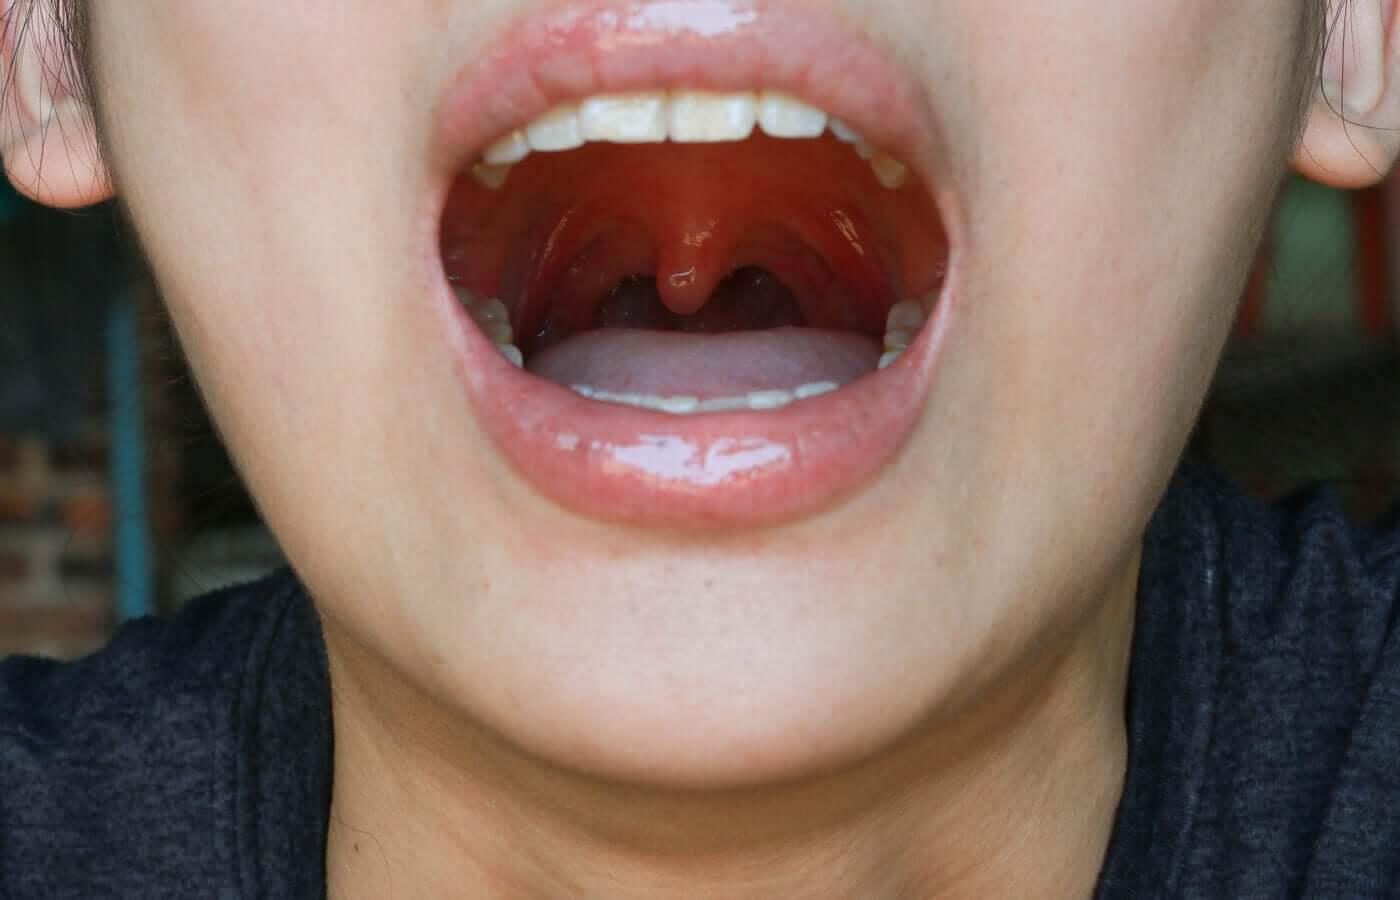 A woman with a swollen uvula.